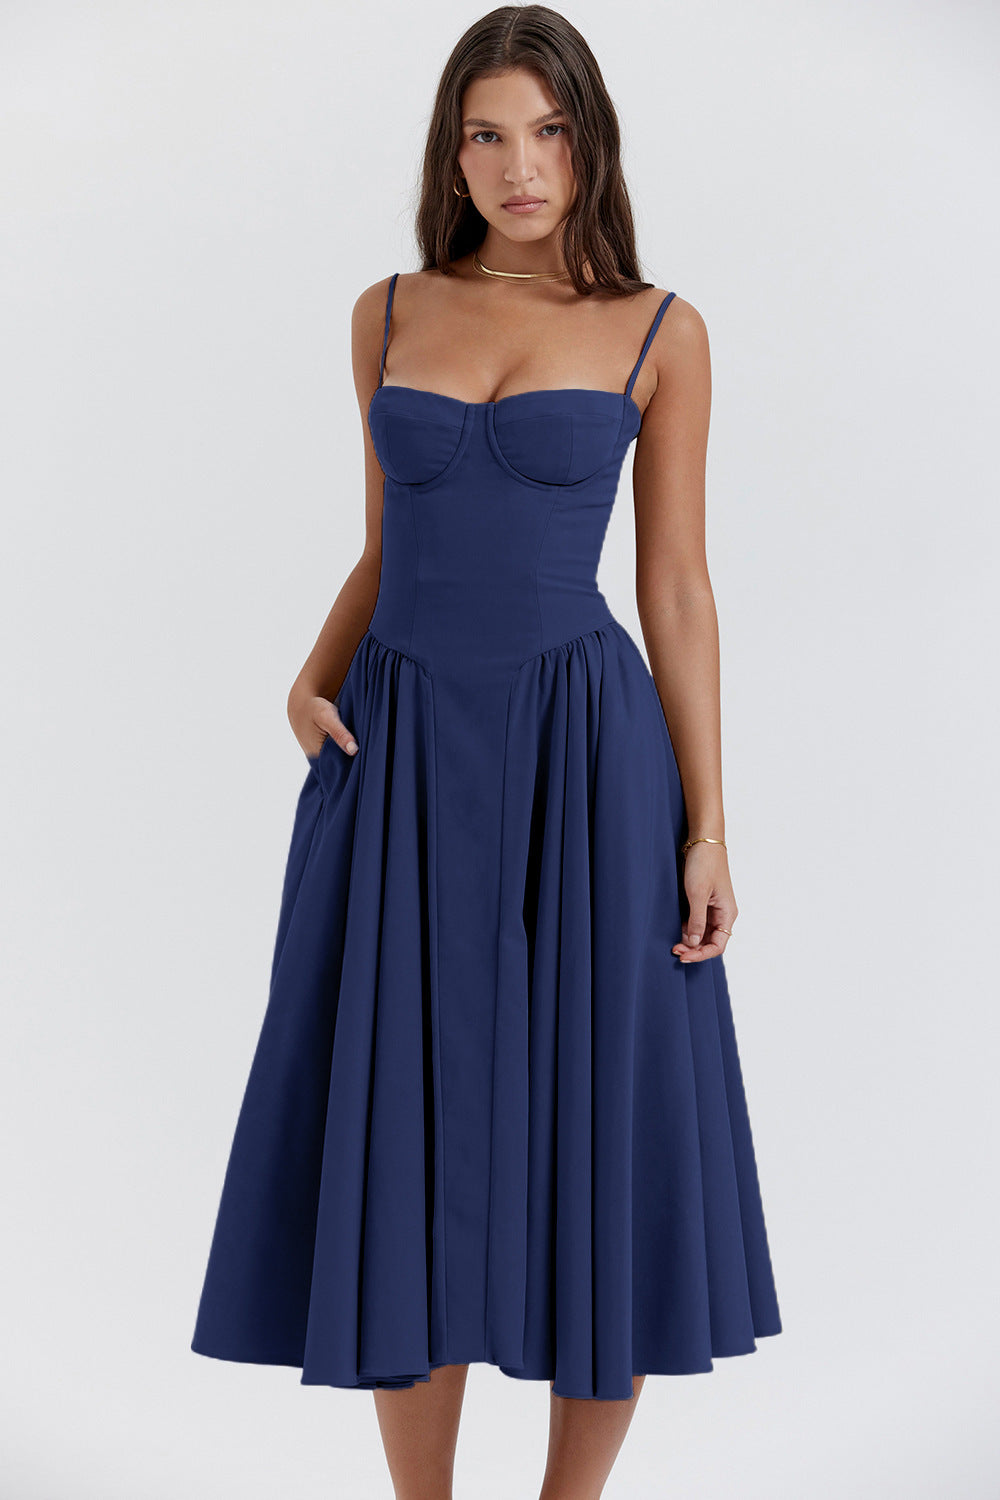 Summer Elegant Party Gown